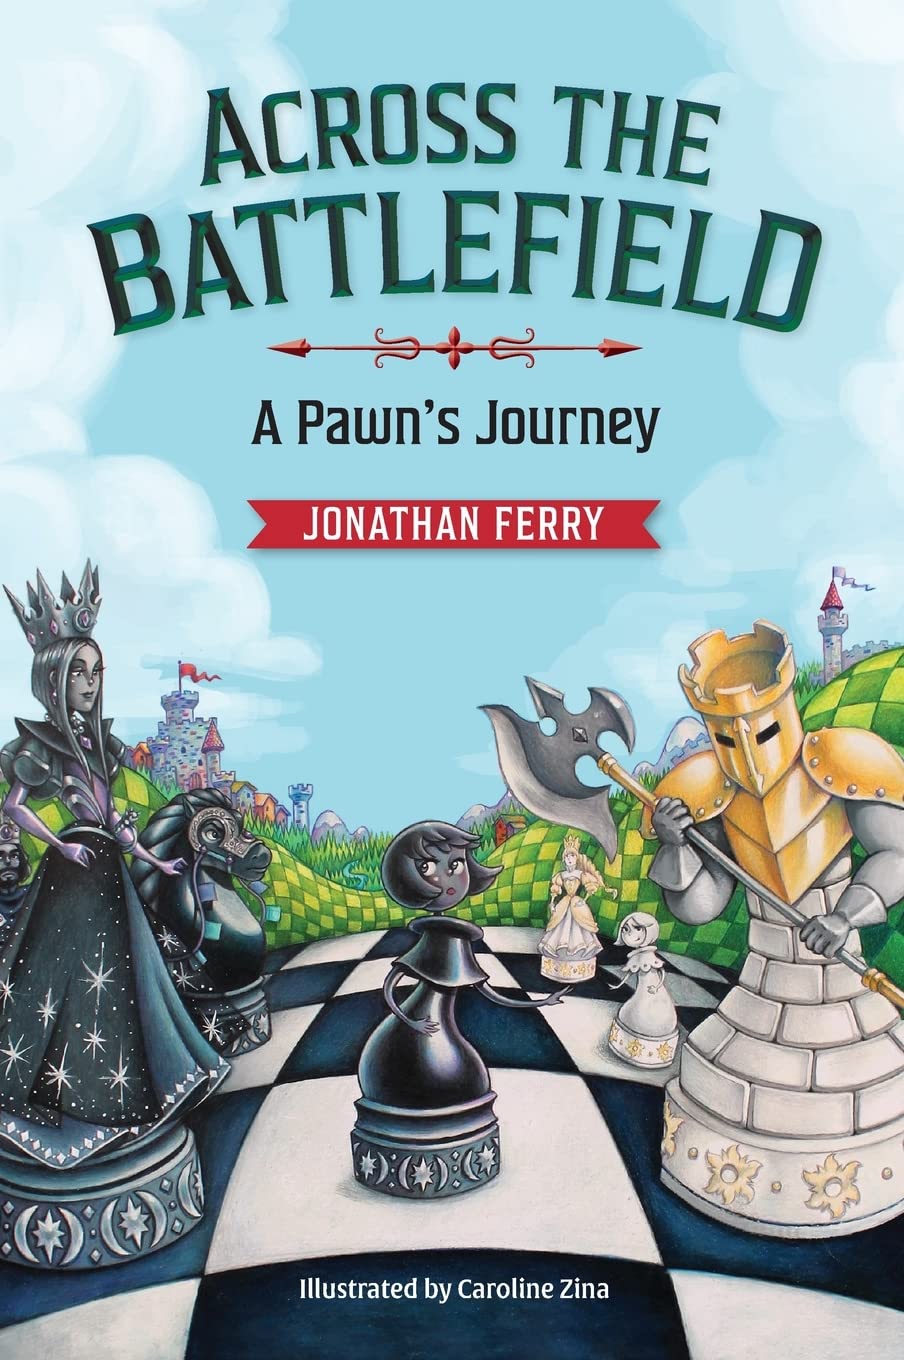 Across the Battlefield: A Pawn's Journey, Jonathan Perry, Chess Tales, LLC (17 Oct. 2022), ISBN-13 ‏ : ‎ 979-8986059211